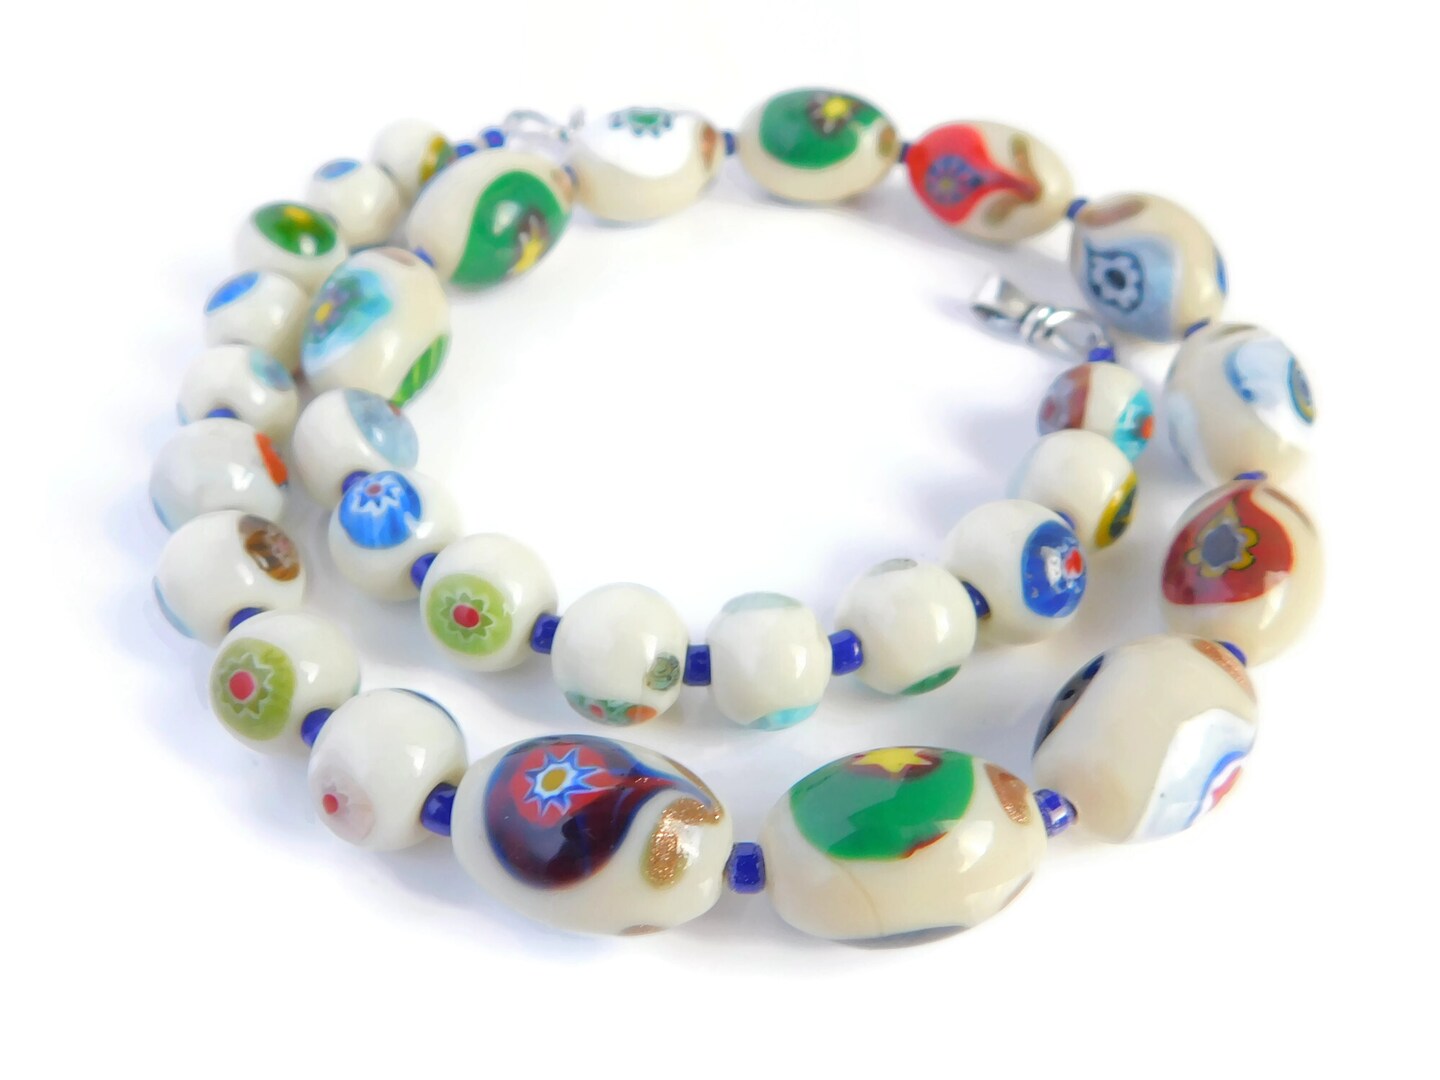 Colorful Flower Patterns Millefiori Glass Beads Lampwork Beads For